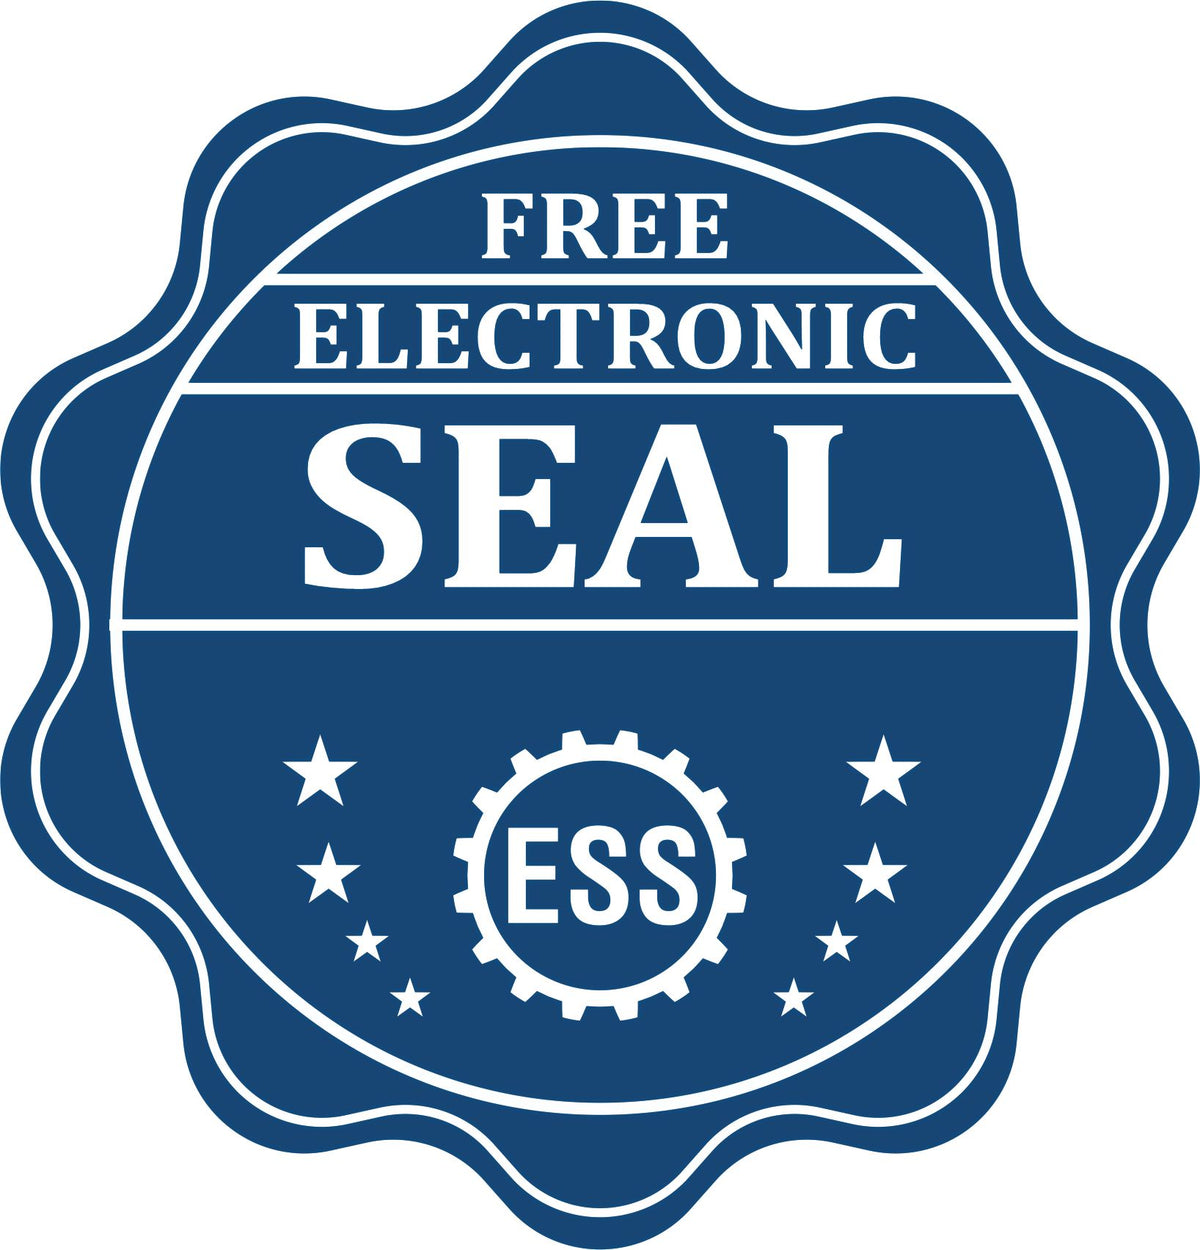 A badge showing a free electronic seal for the State of Maryland Long Reach Architectural Embossing Seal with stars and the ESS gear on the emblem.